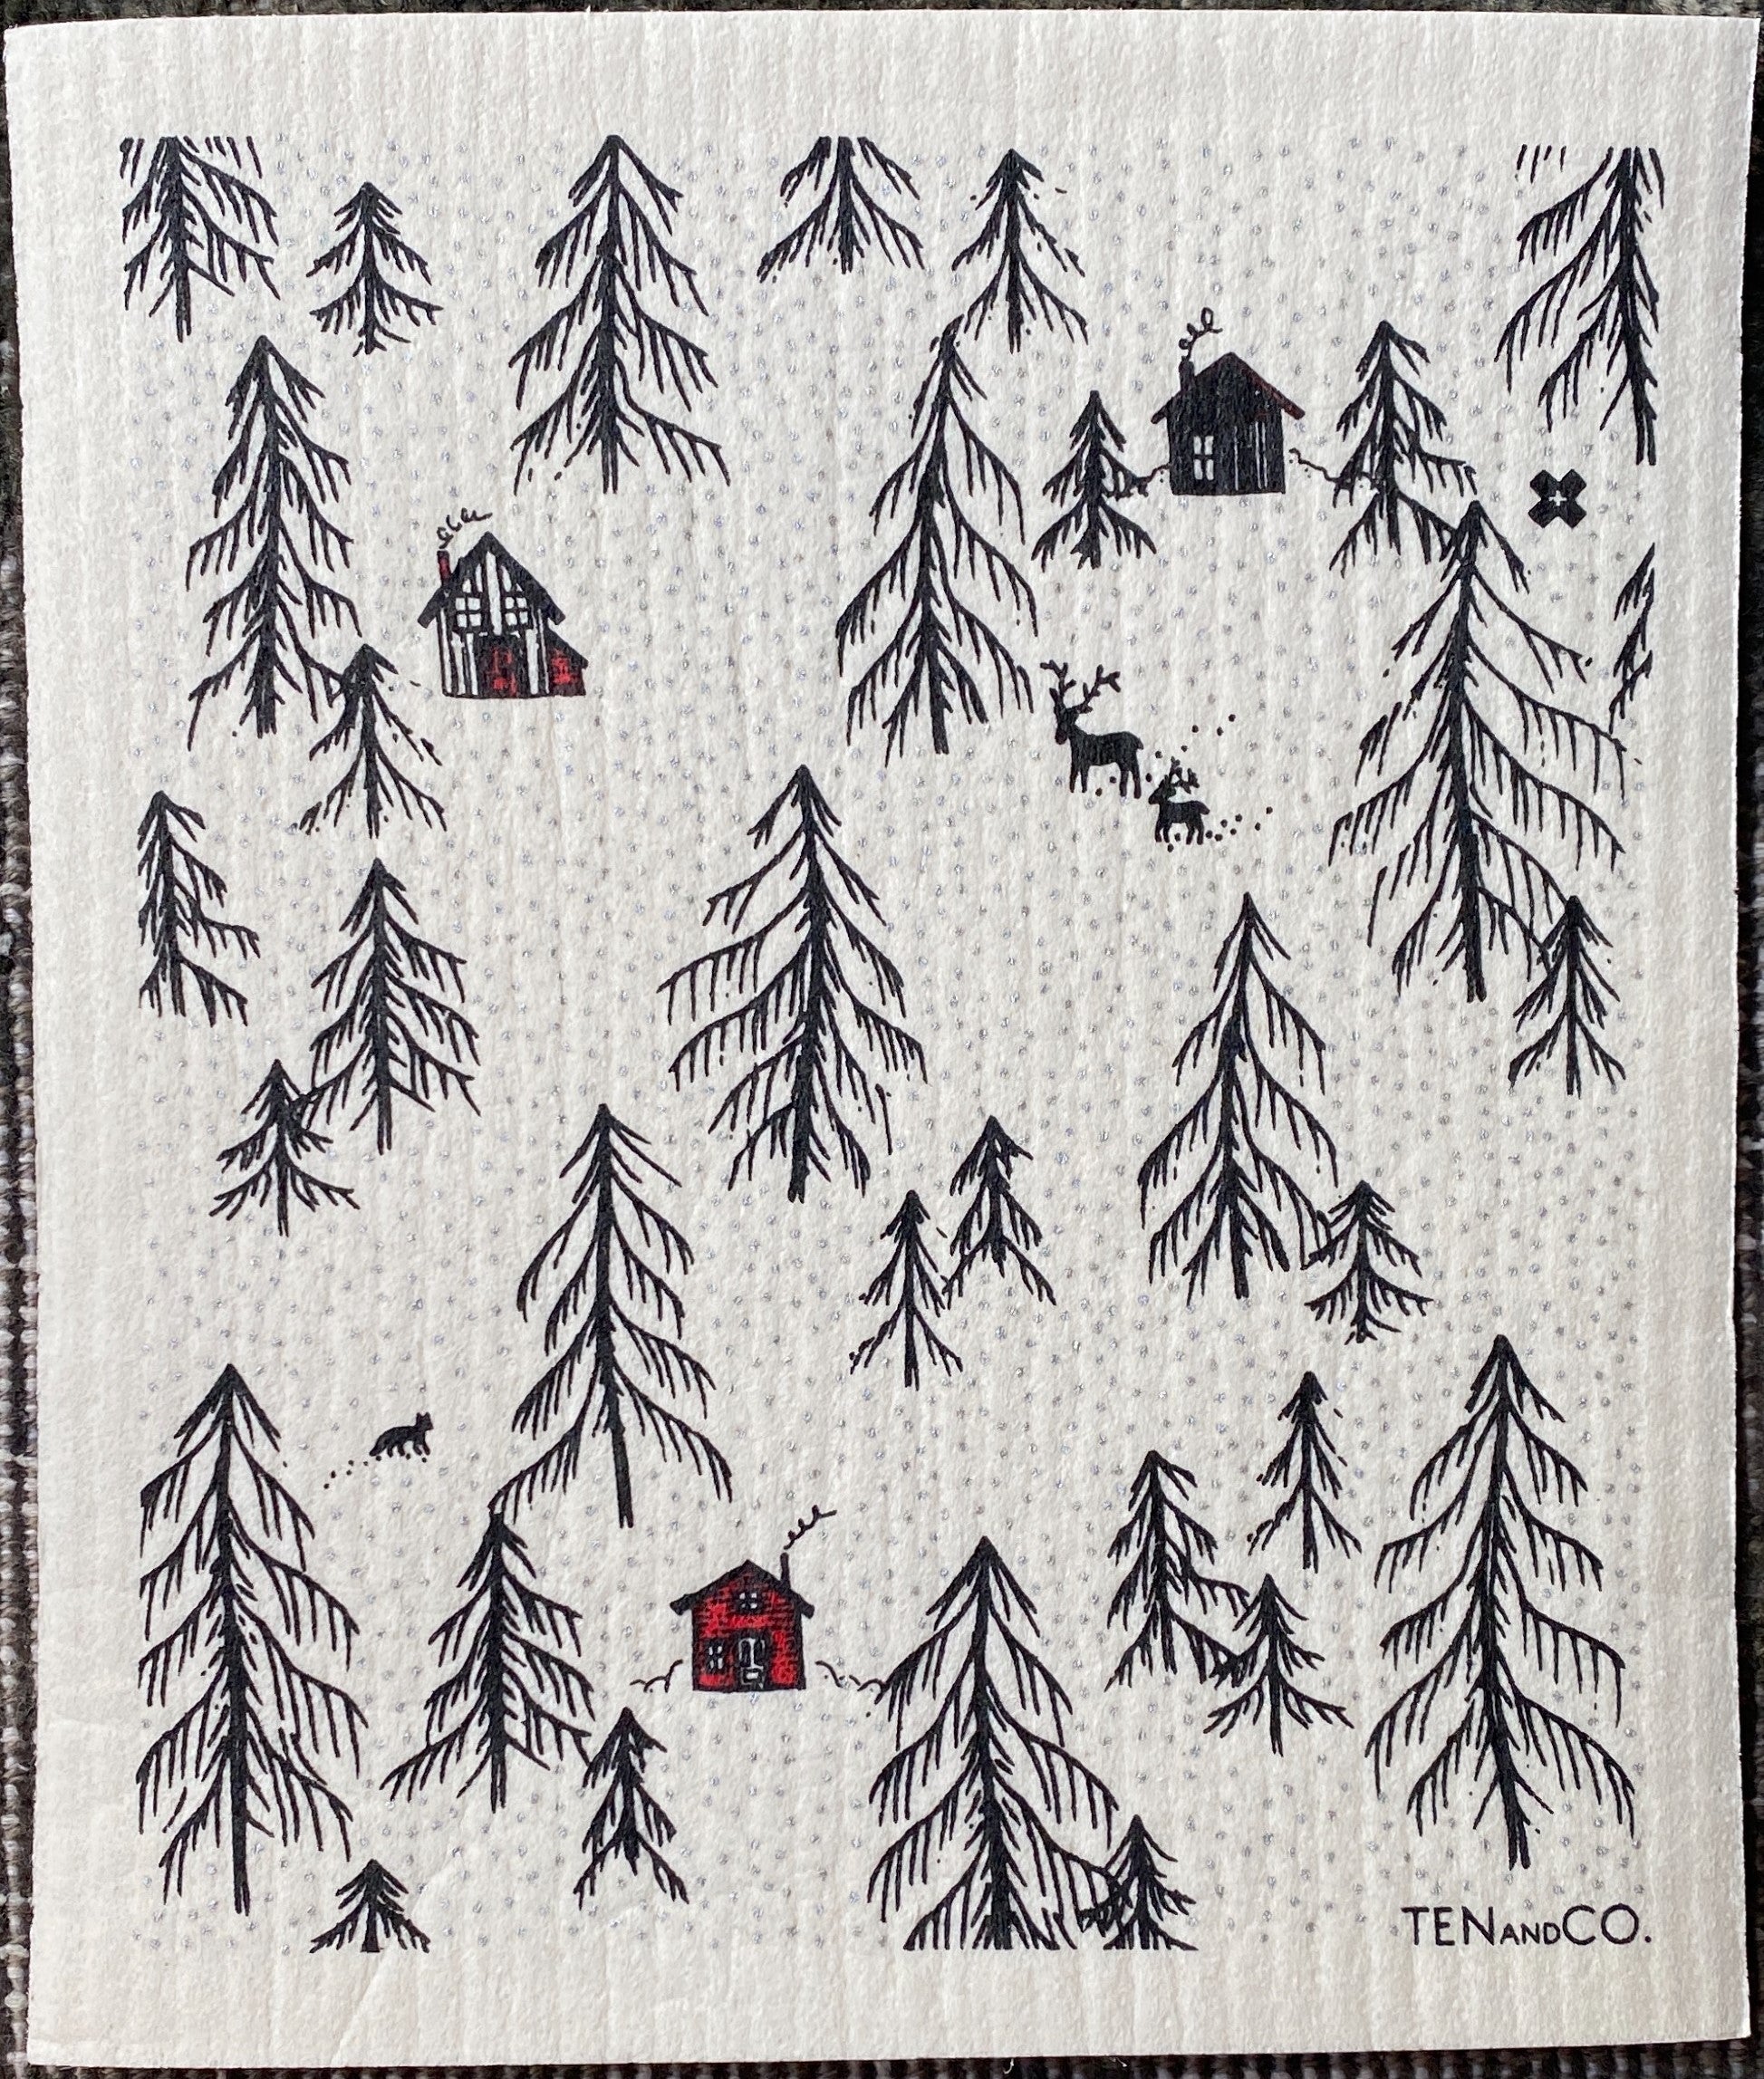 Three black and red houses surrounded by black pine trees with deer and fox in scene.